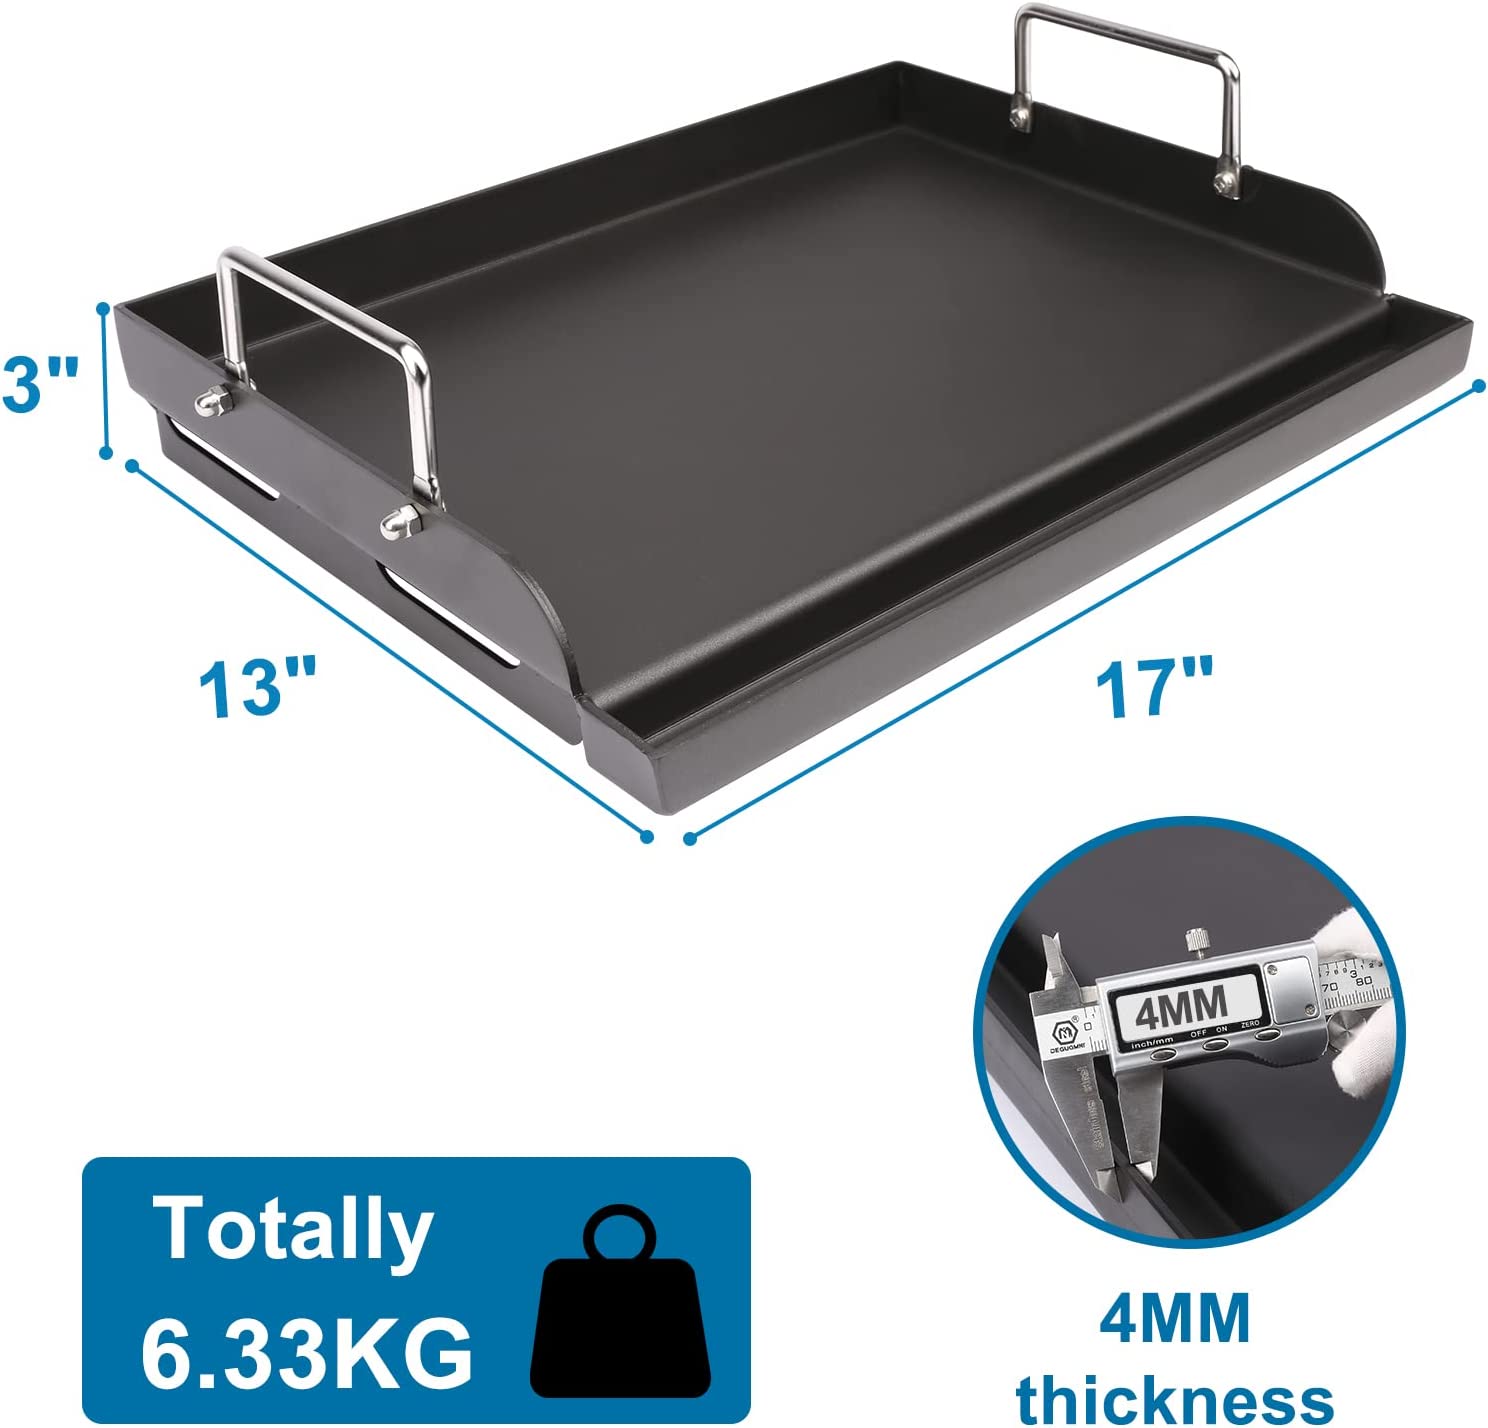 Nonstick Coating Cooking Griddle for GAS Grill, 25x16” Griddle Plate Insert for GAS Stove, Grills, Flat Griddle Top Plate for Grilling